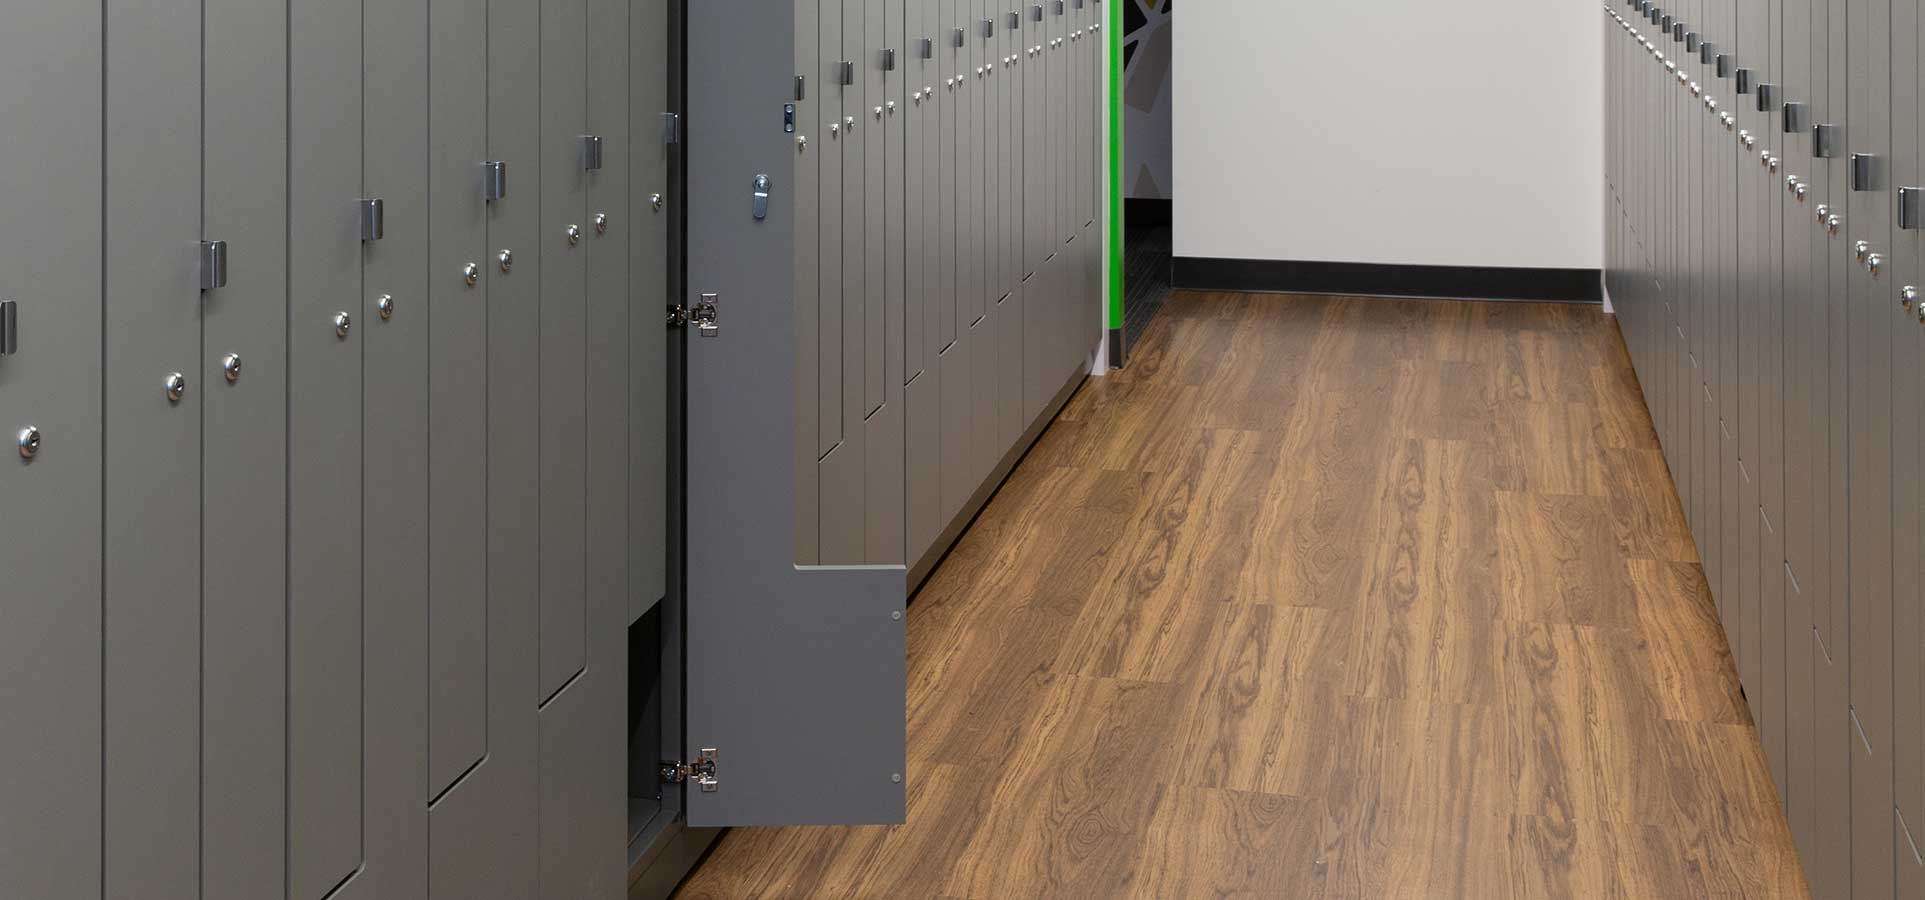 Two walls of employee storage lockers with one open on the left side